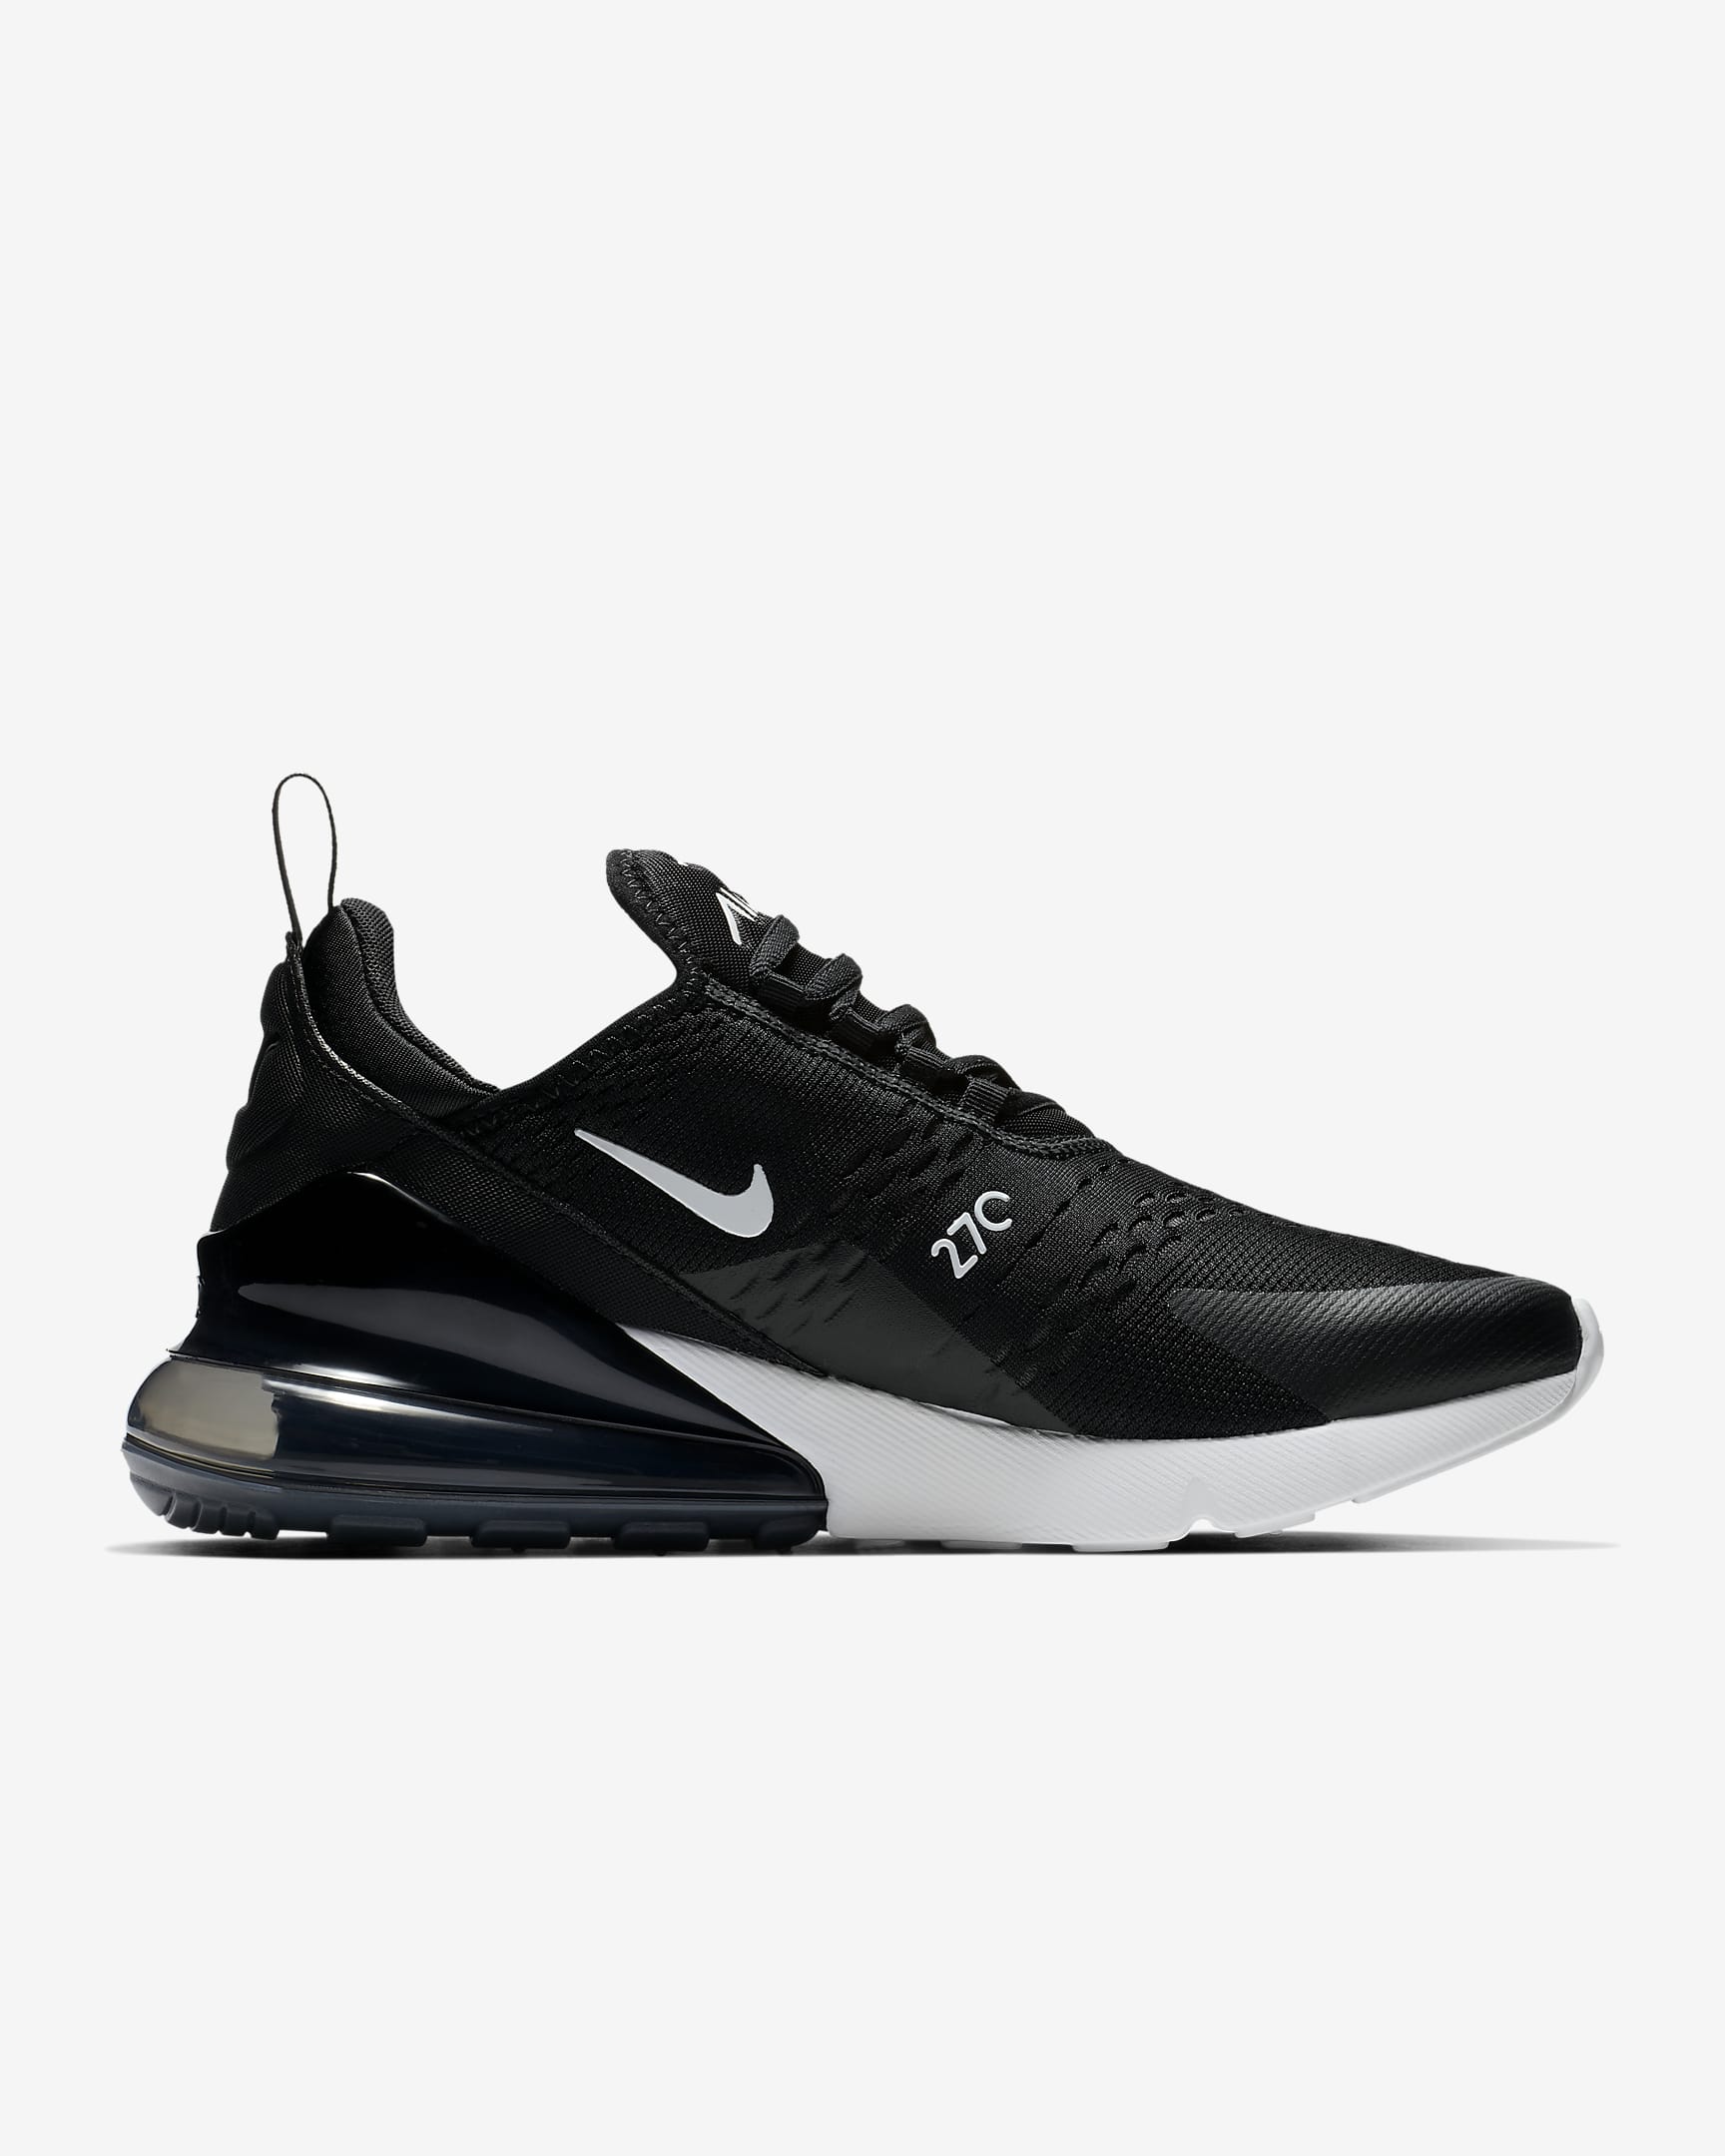 Nike Air Max 270 Women's Shoes - Black/White/Anthracite